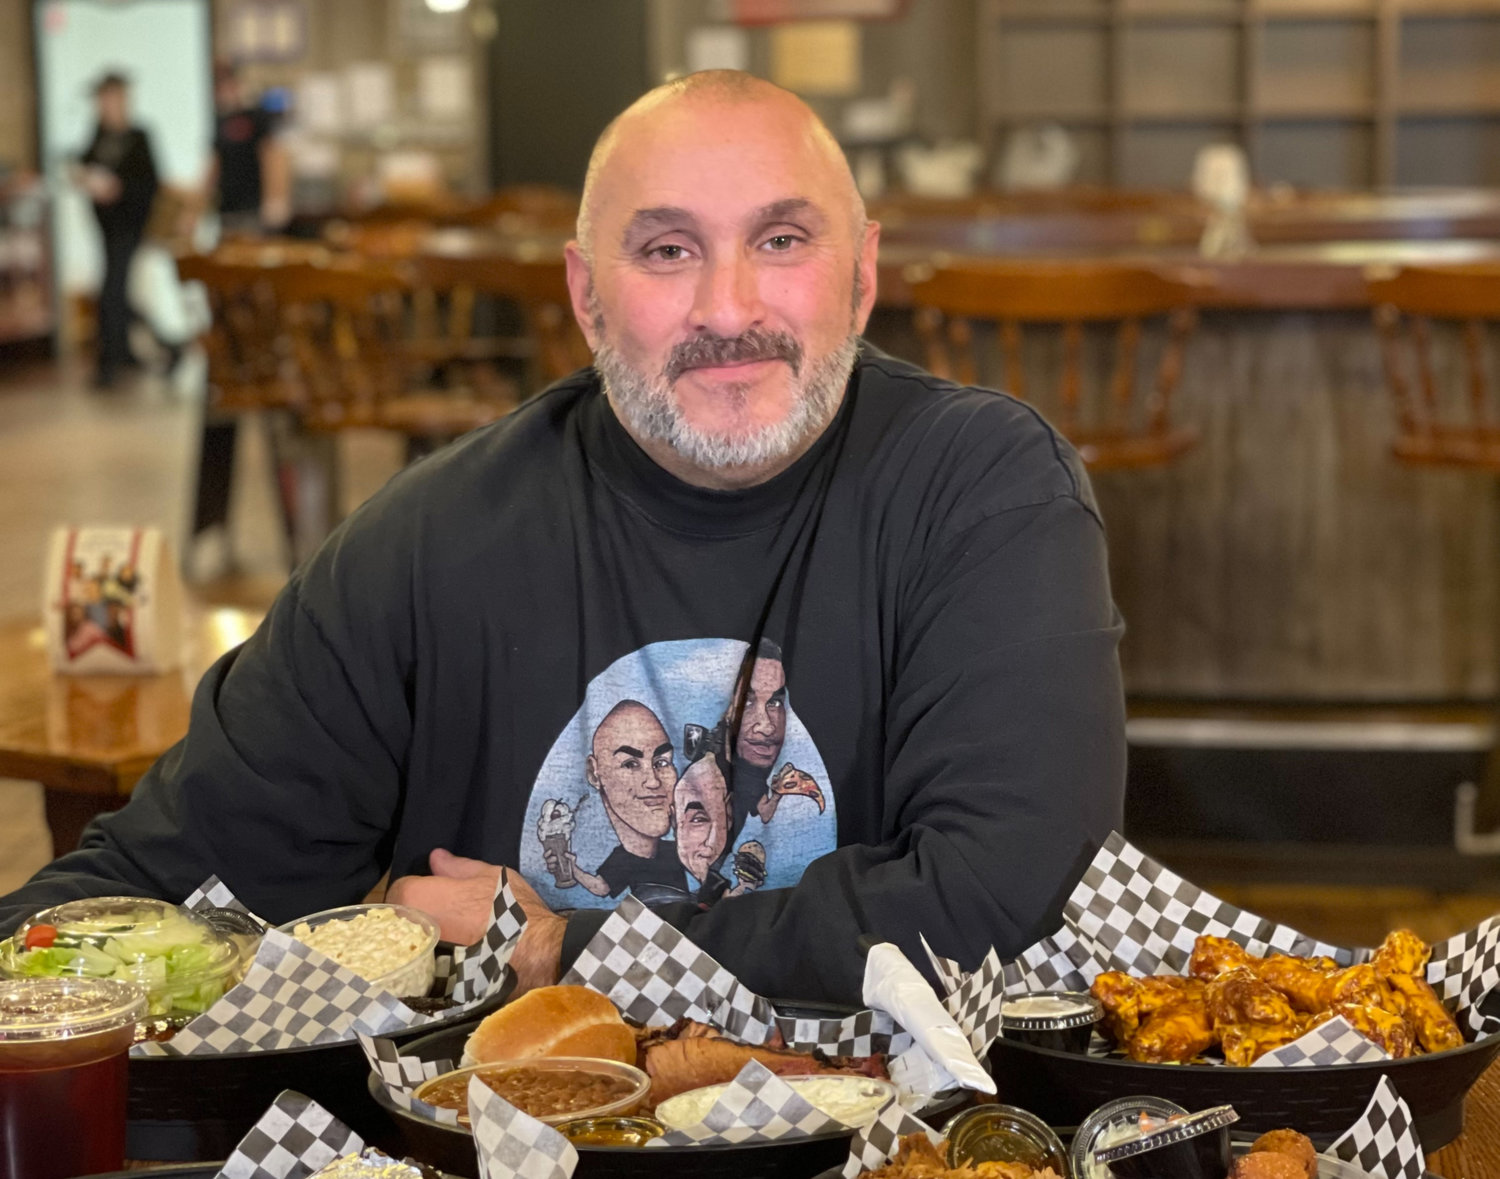 Bill Vinci, host of The Empire Plate, gets to sample all kinds of food and drinks from across the state as part of the show.